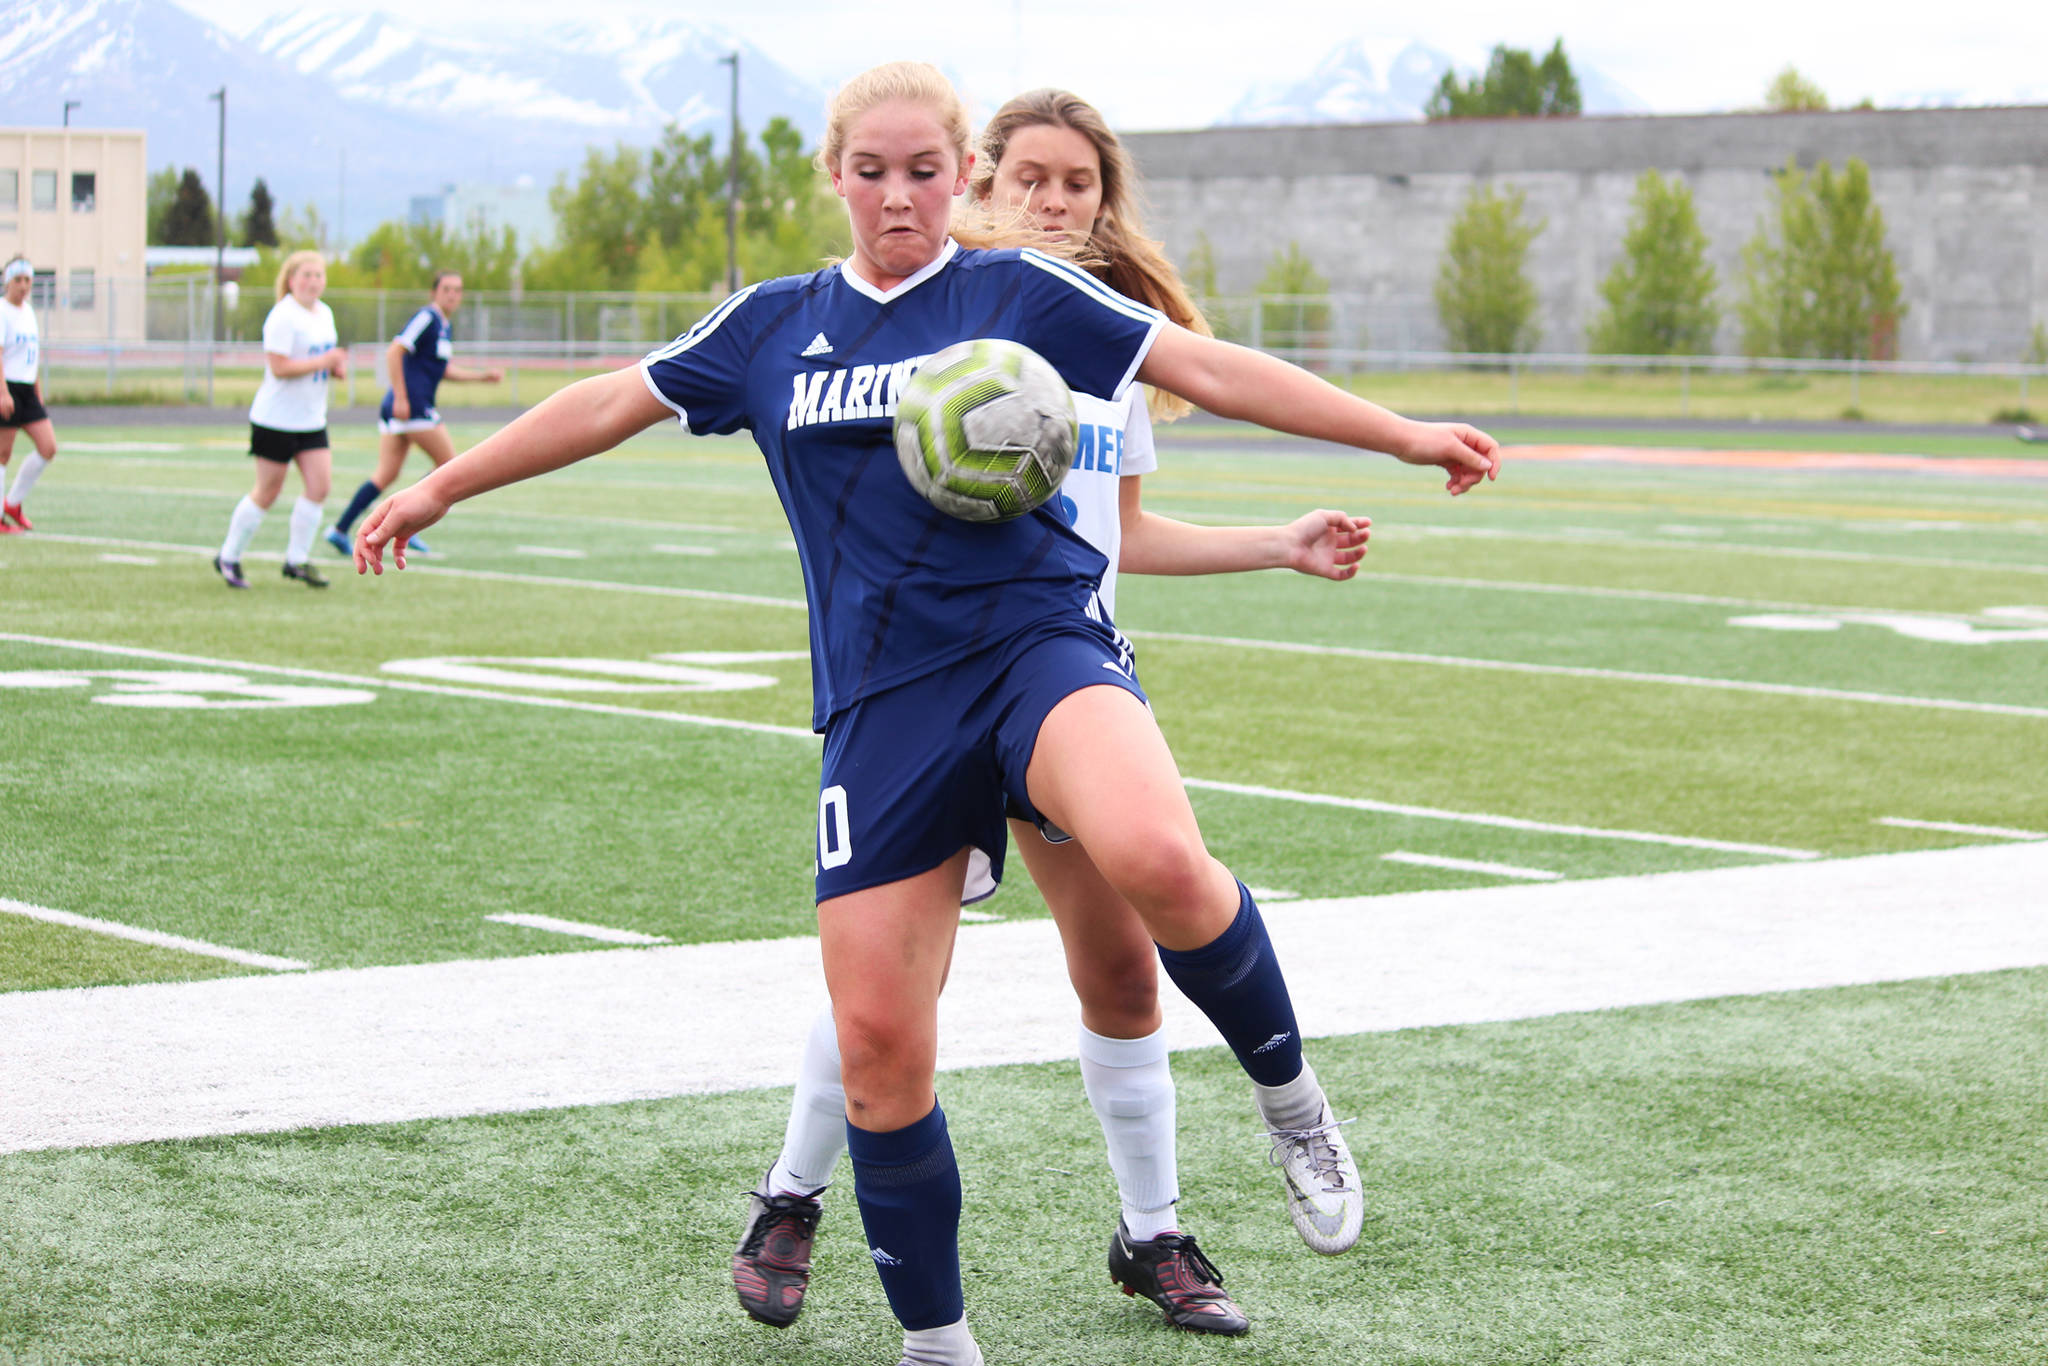 Homer’s Paige Jones sneaks in front of Palmer’s Natalia Bonadio to get the ball on the throw in during a Friday, May 24, 2019 game in the Division II state soccer championship tournament at West Anchorage High School in Anchorage, Alaska. (Photo by Megan Pacer/Homer News)